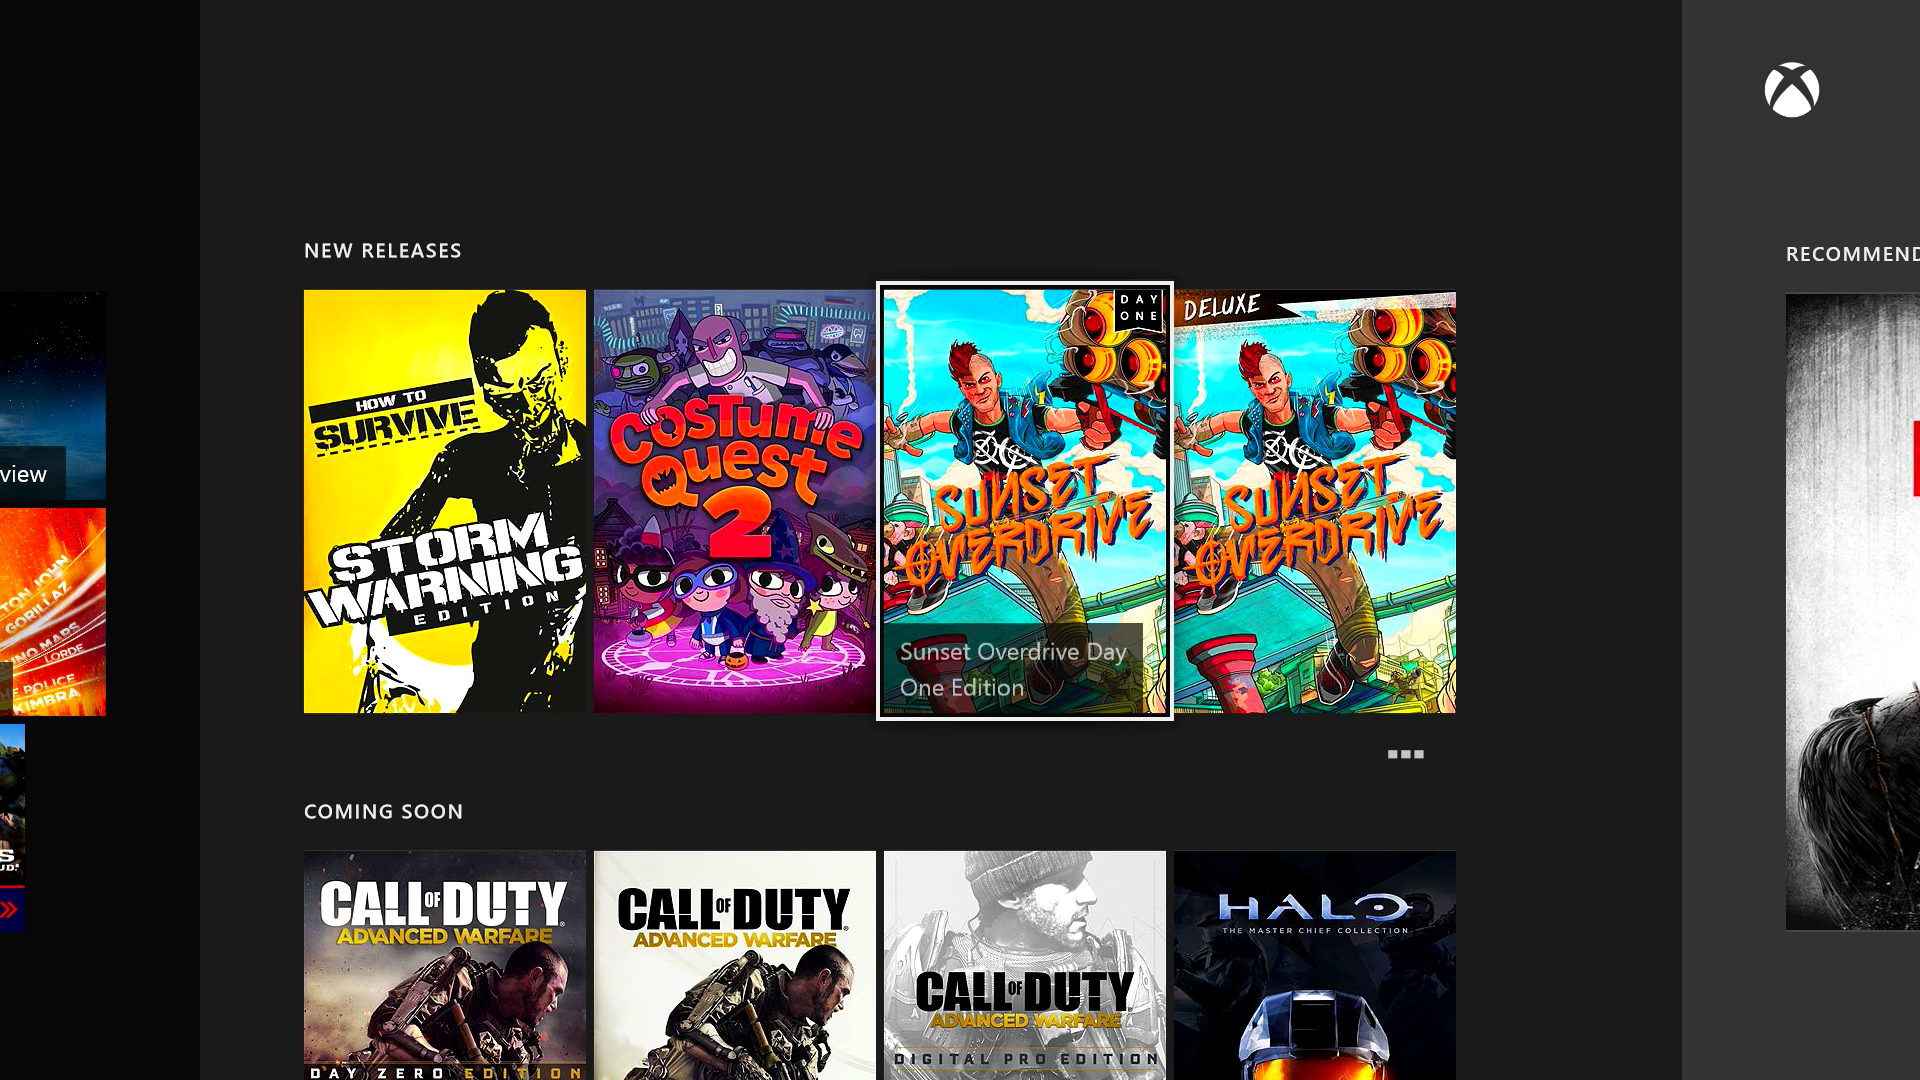 Image for Take a look at the revamped layout of the Xbox One store